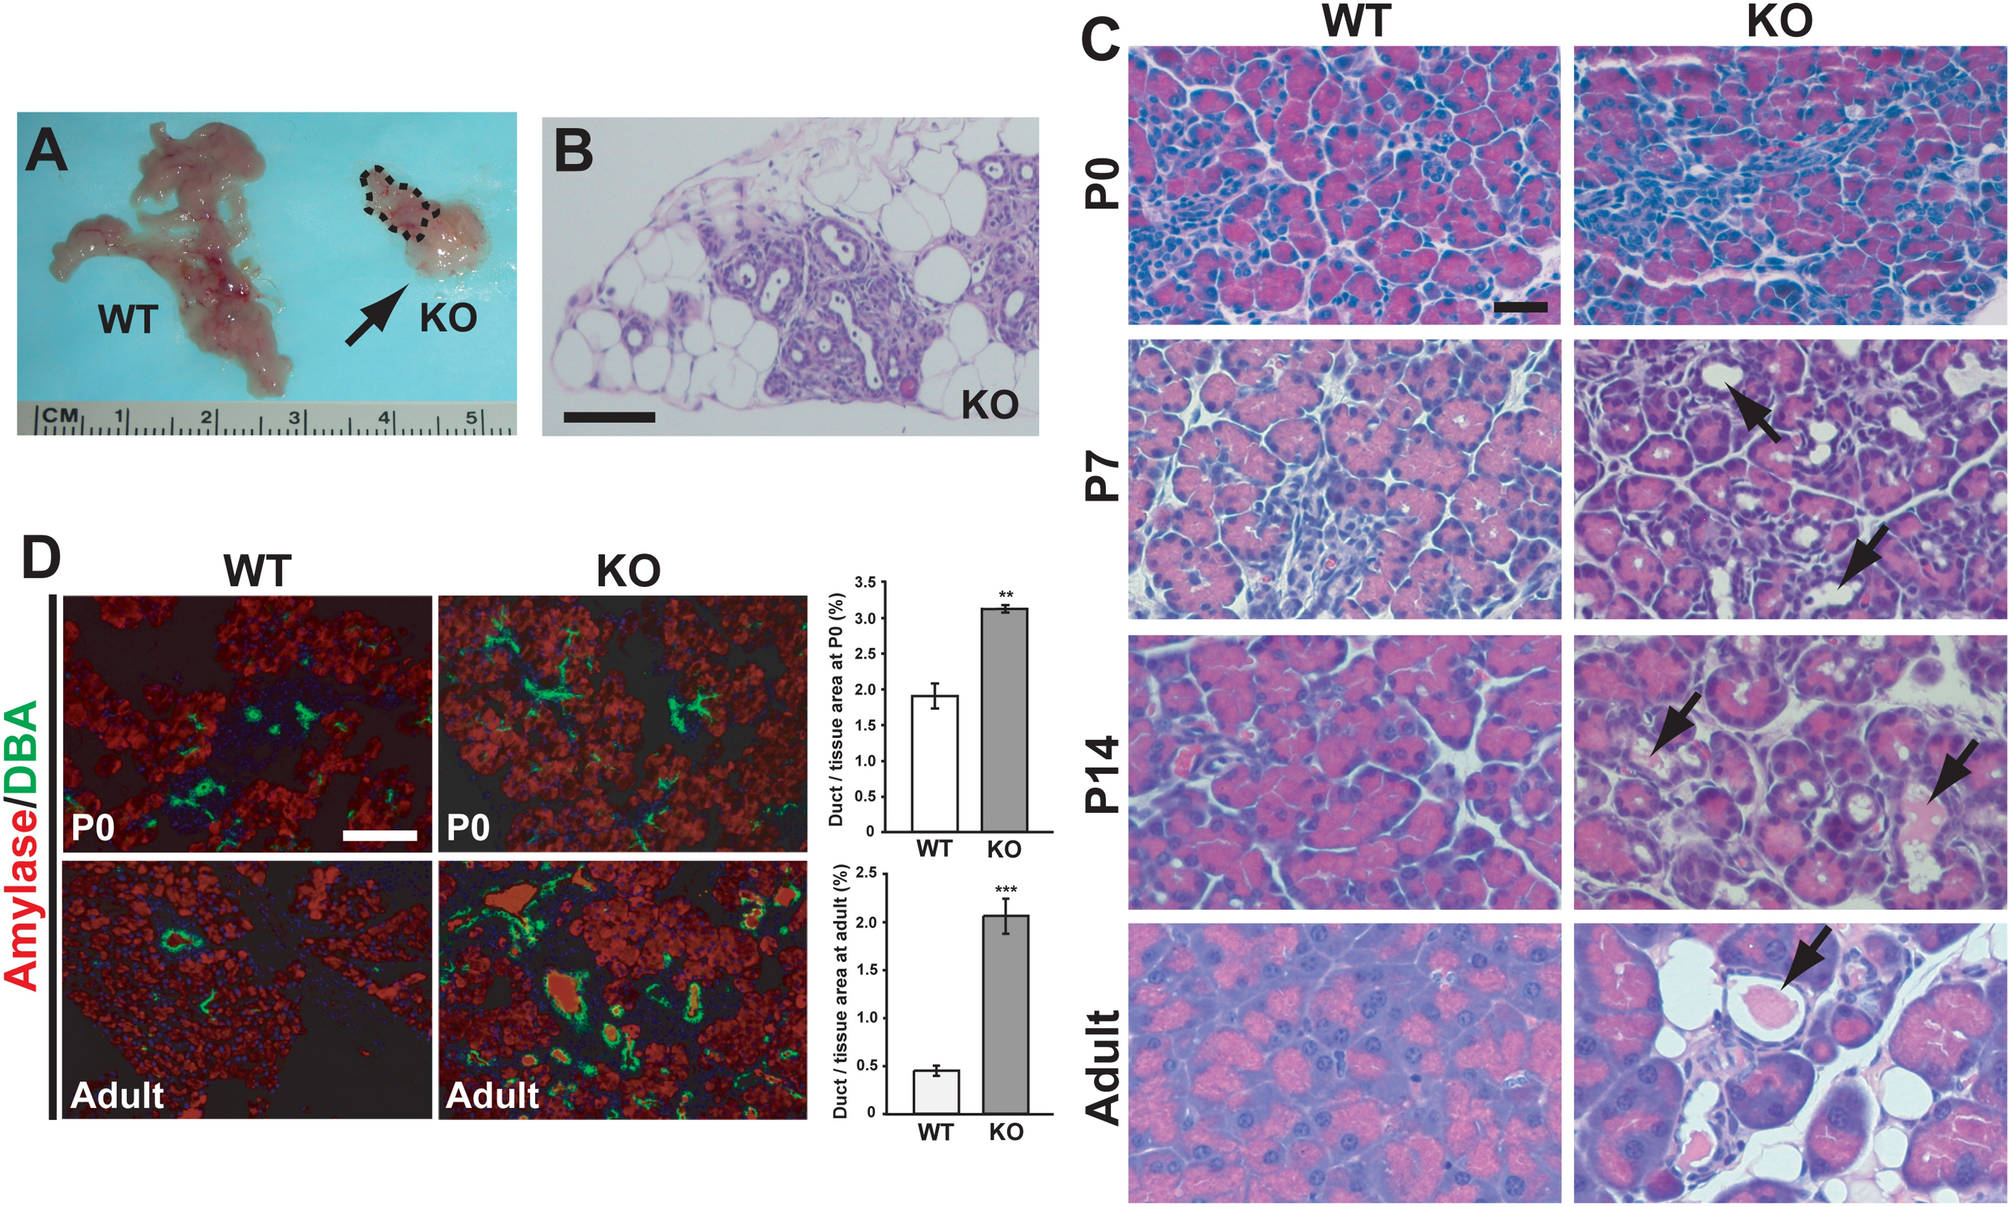 Loss Of The Ciliary Protein Chibby1 In Mice Leads To Exocrine Pancreatic Degeneration And Pancreatitis Scientific Reports